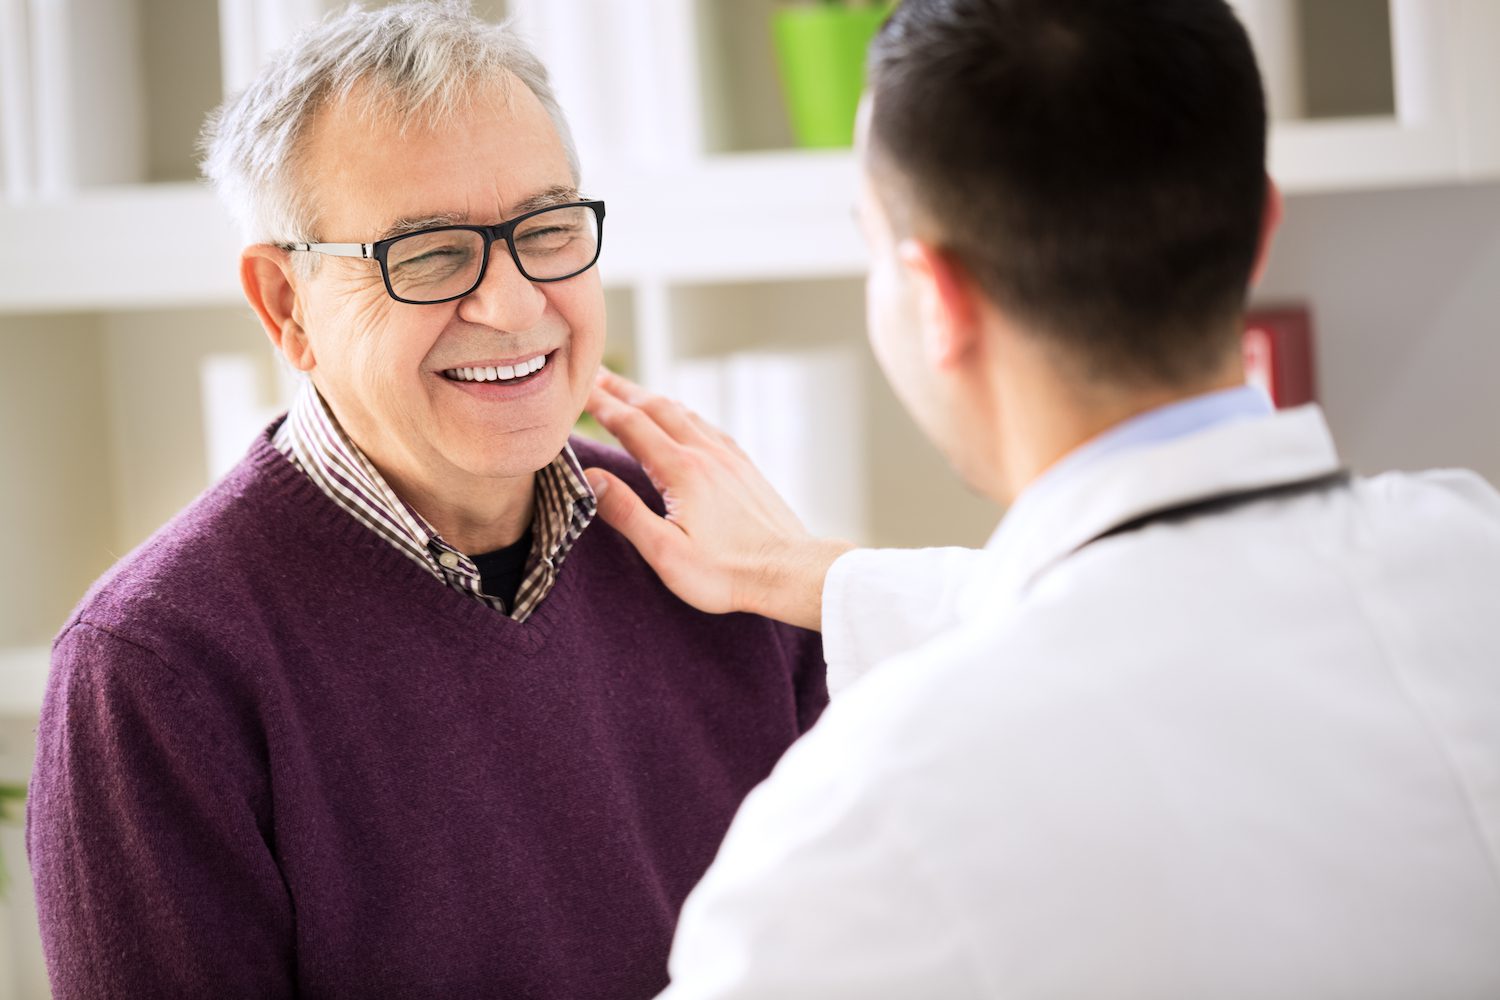 Older man smiles while discussing sleep apnea surgery with a health professional